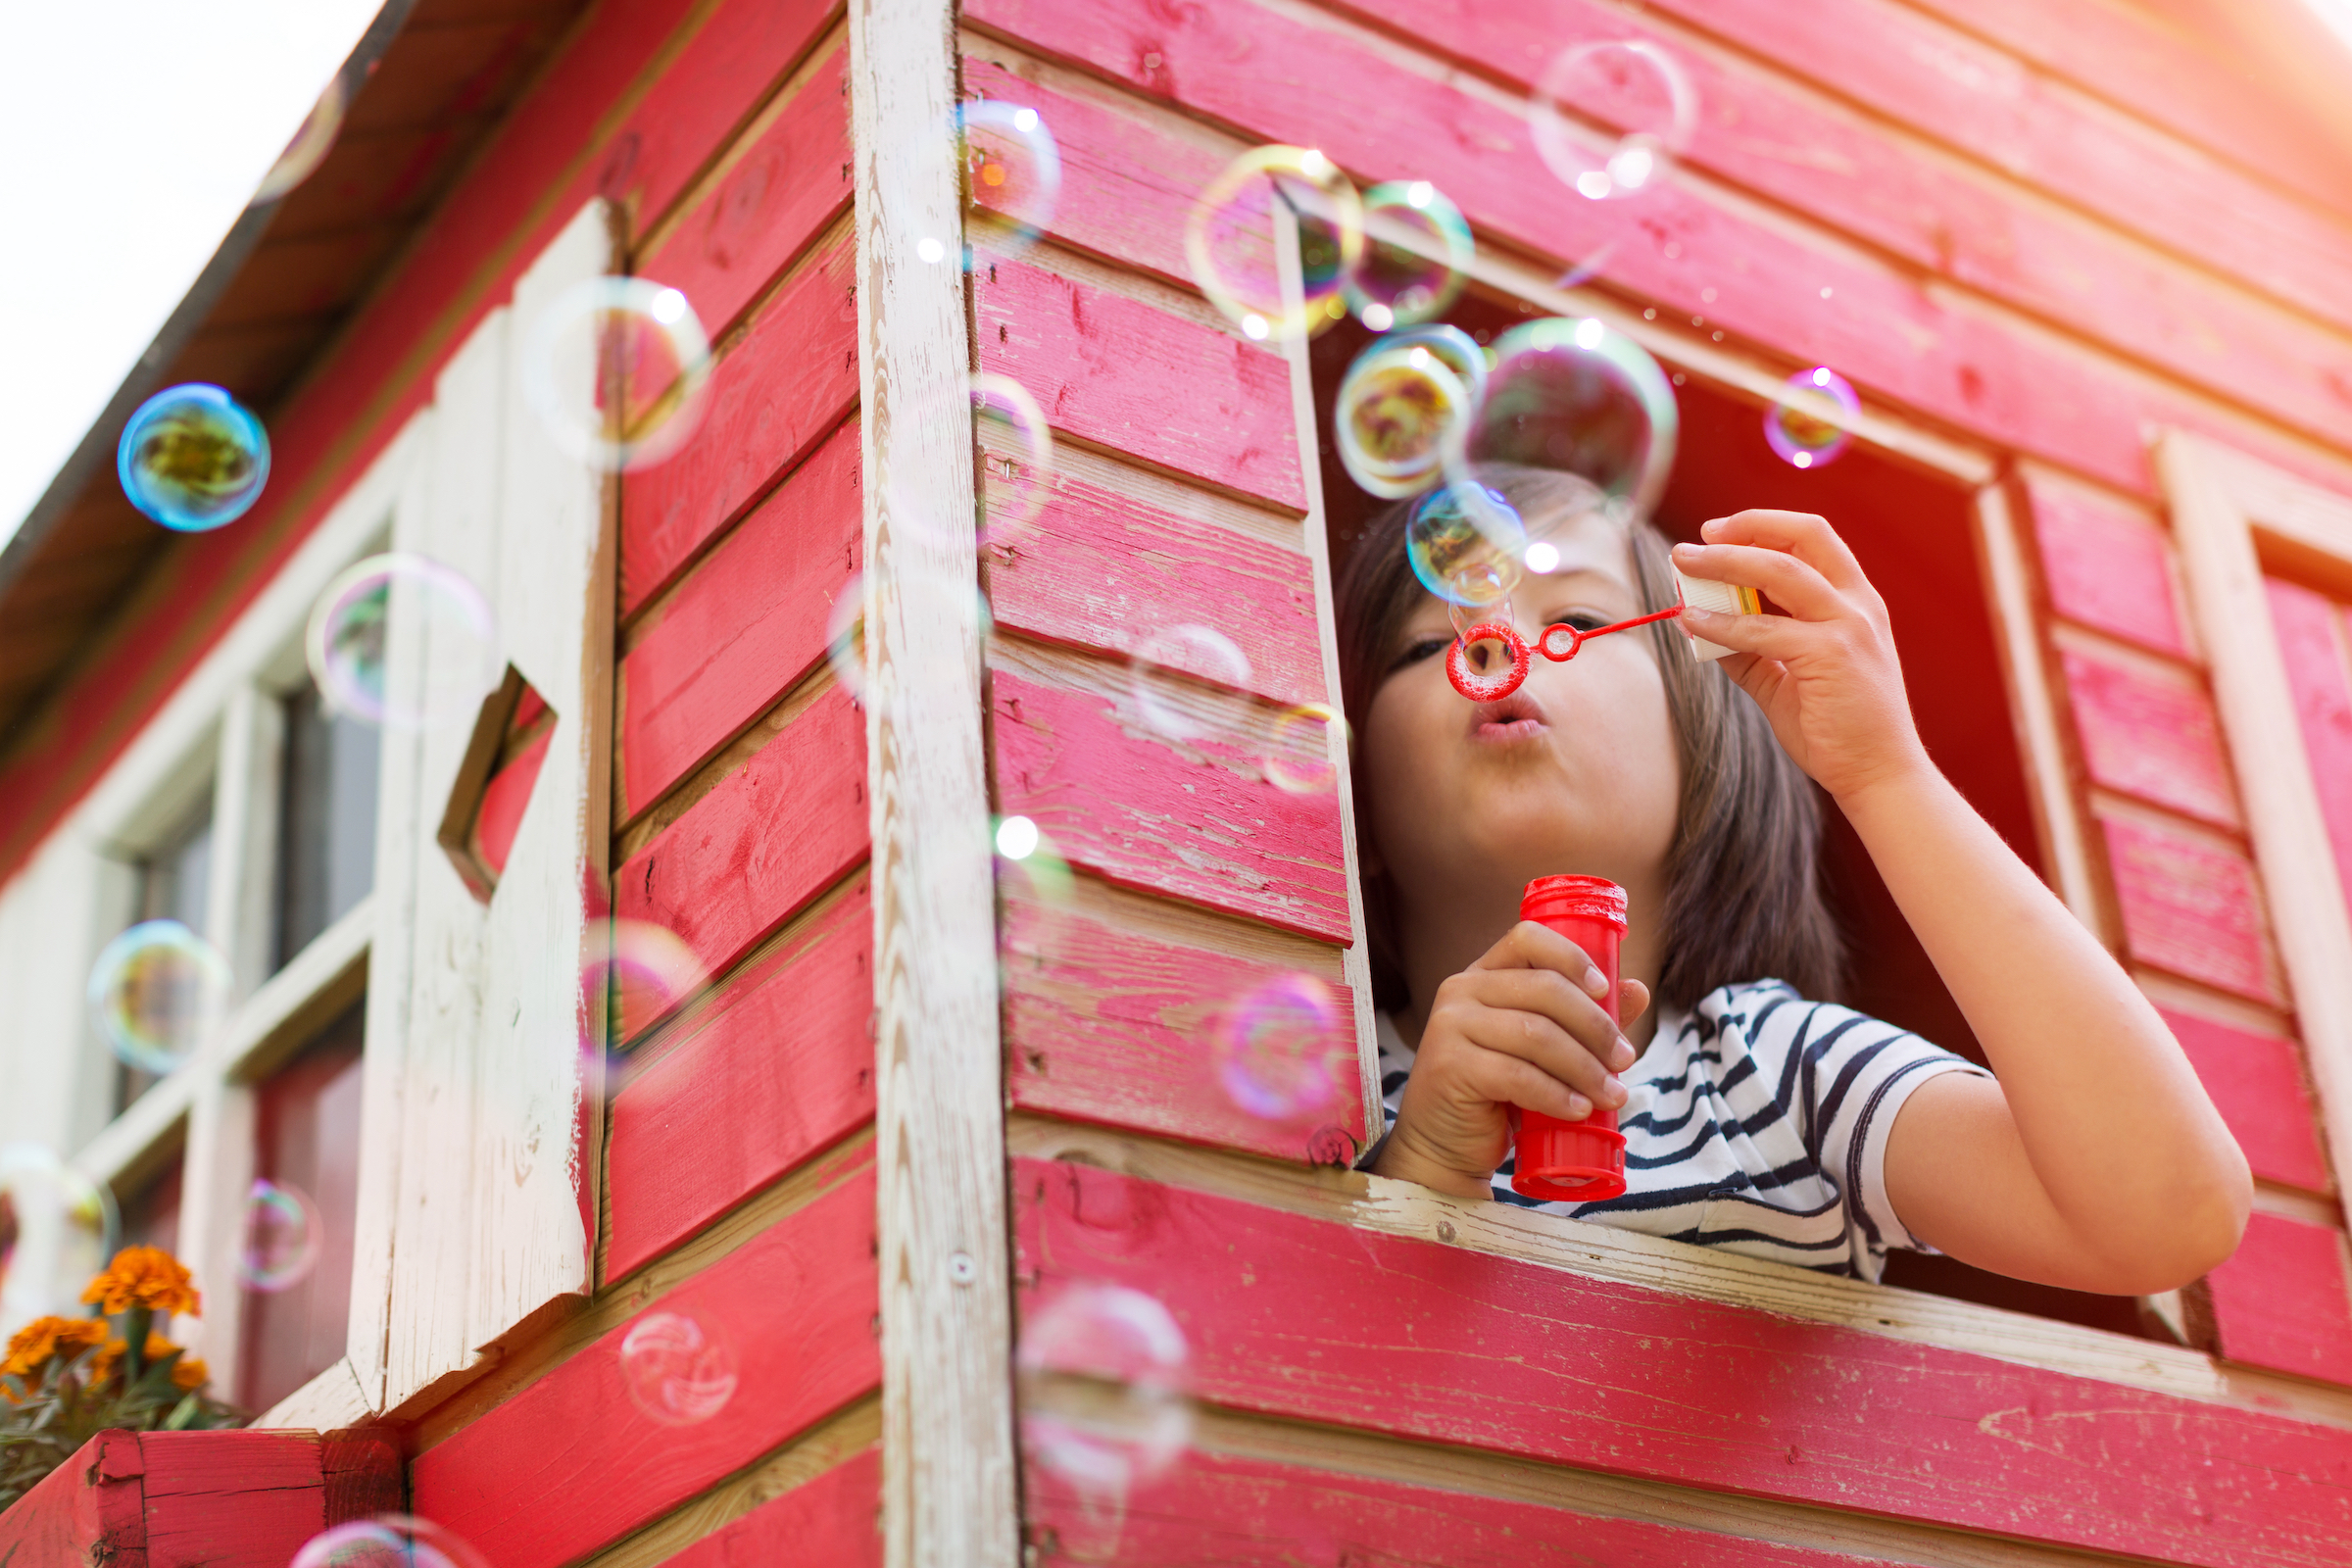 Child blowing bubbles in a playhouse